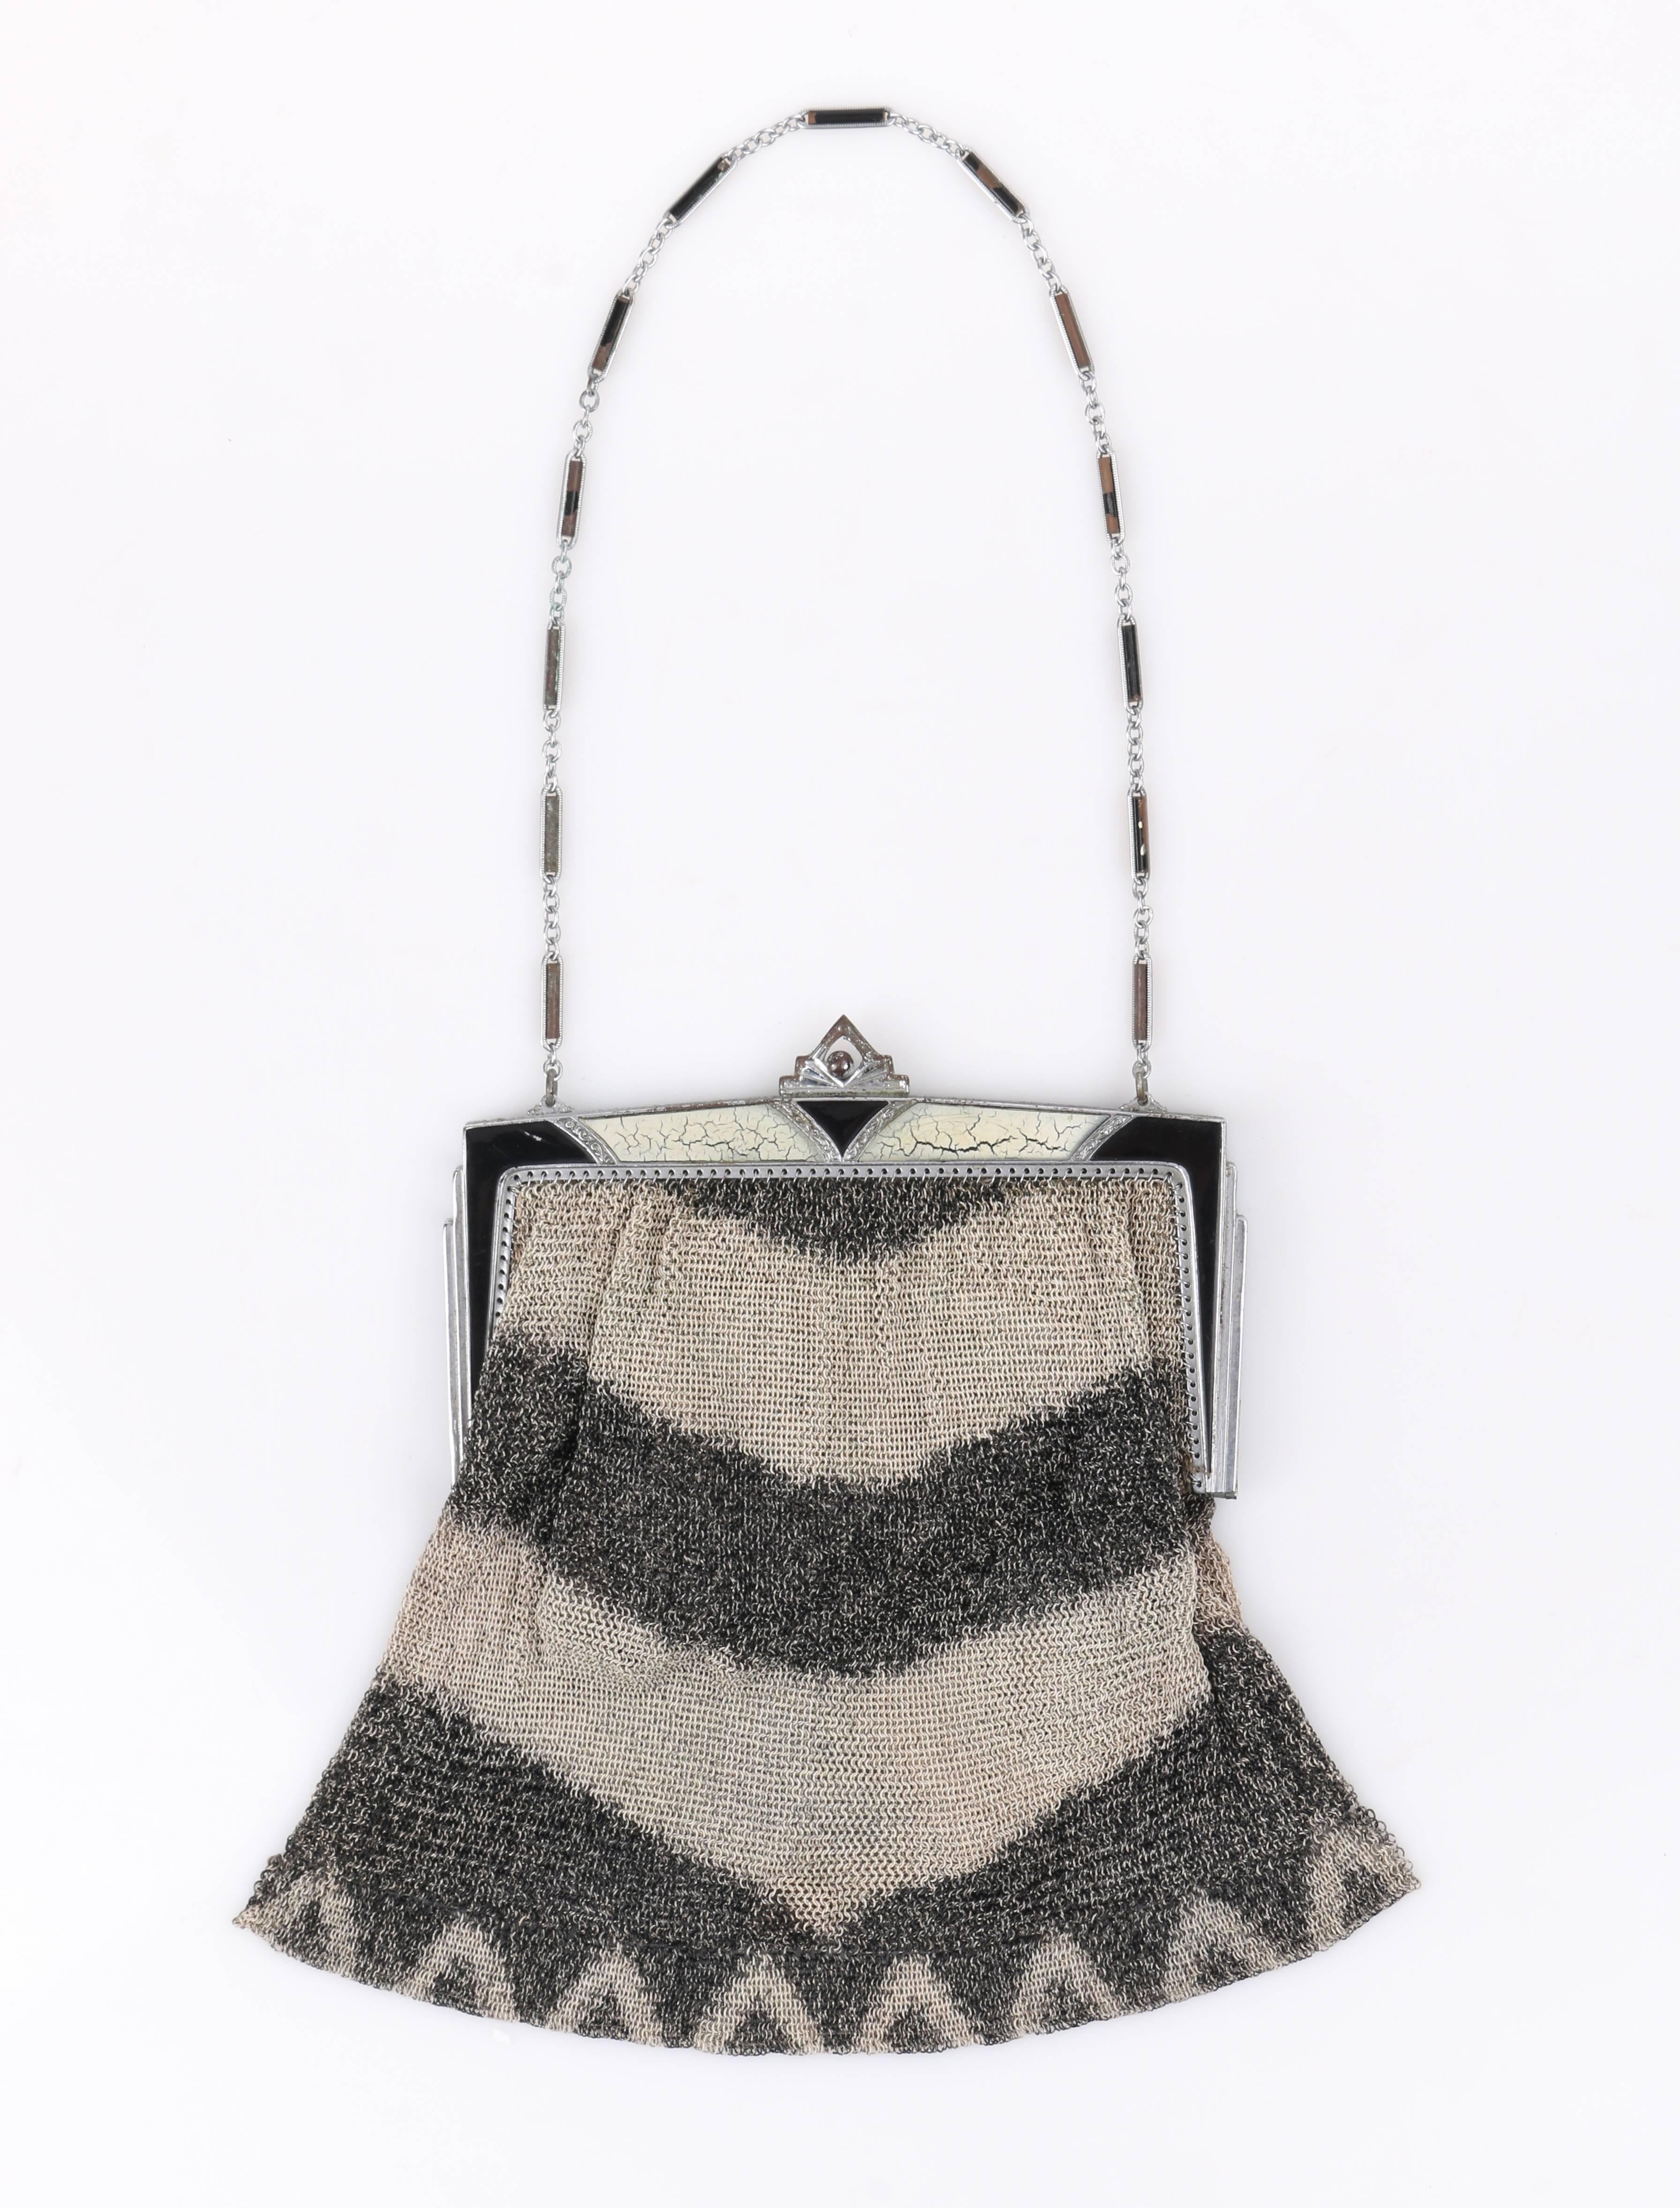 Vintage Art Deco c.1920's gray metal mesh enamel frame top flapper evening purse. Taupe and charcoal gray chevron patterned metal mesh body. Silver-toned metal frame top with black and beige enamel and carved filigree detail. Pointed art deco kiss